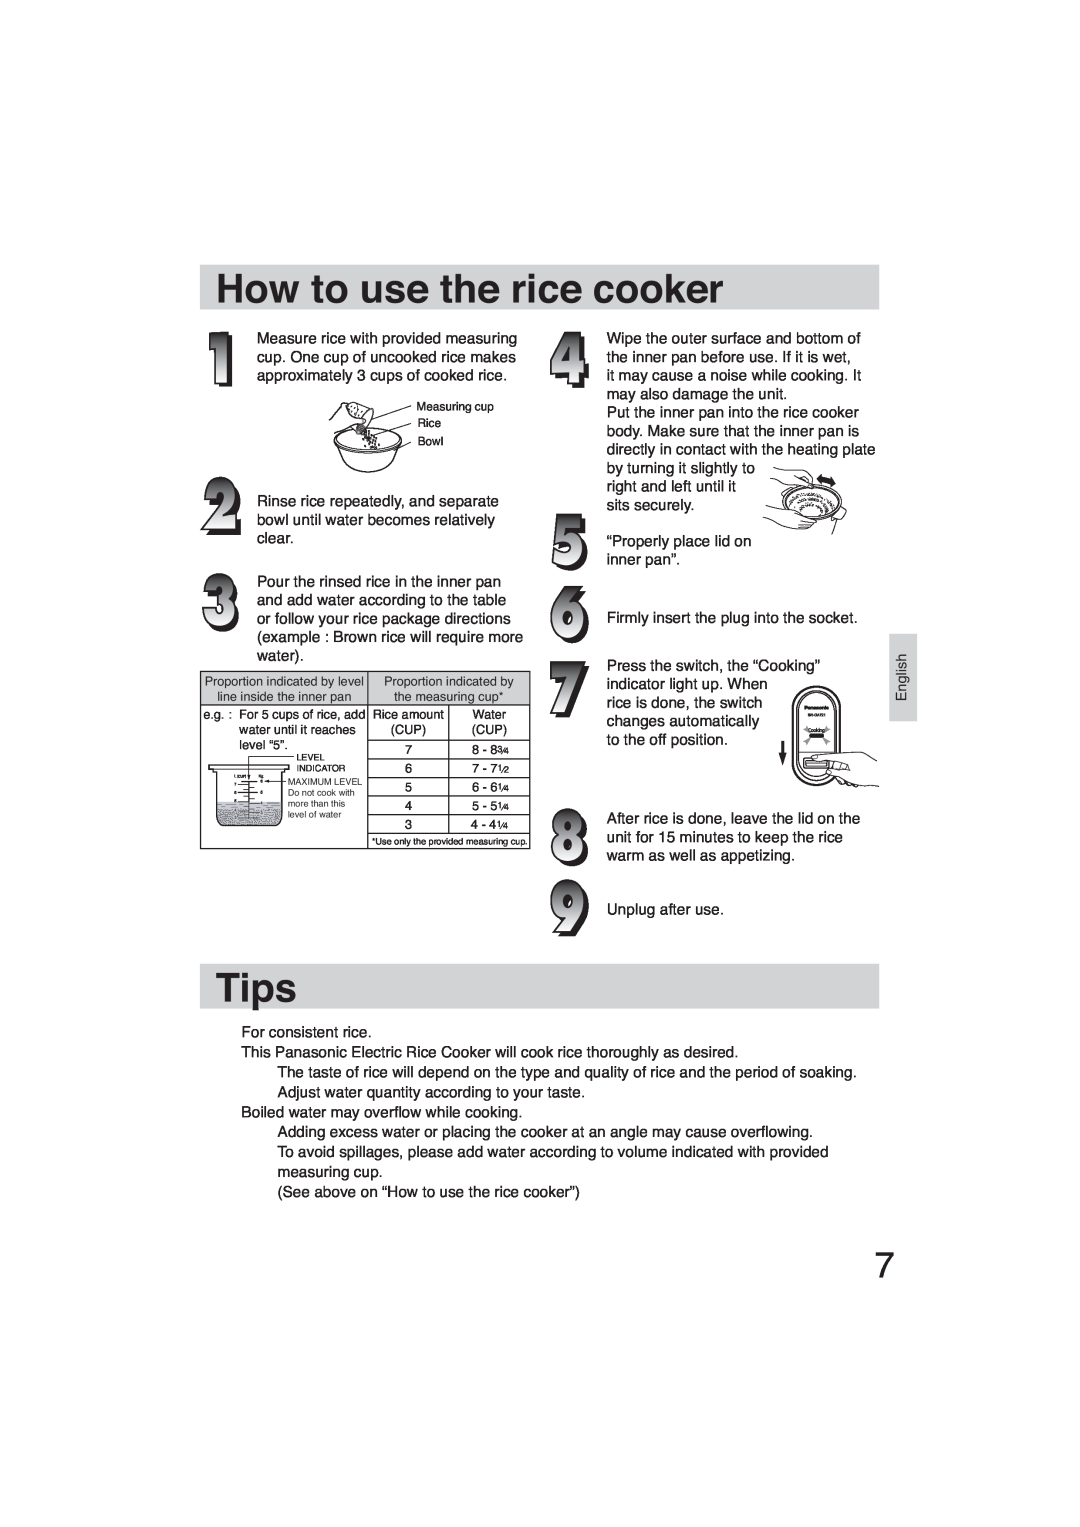 Panasonic SR-GA721 How to use the rice cooker, Tips, the measuring cup, e.g. For 5 cups of rice, add, Rice amount 